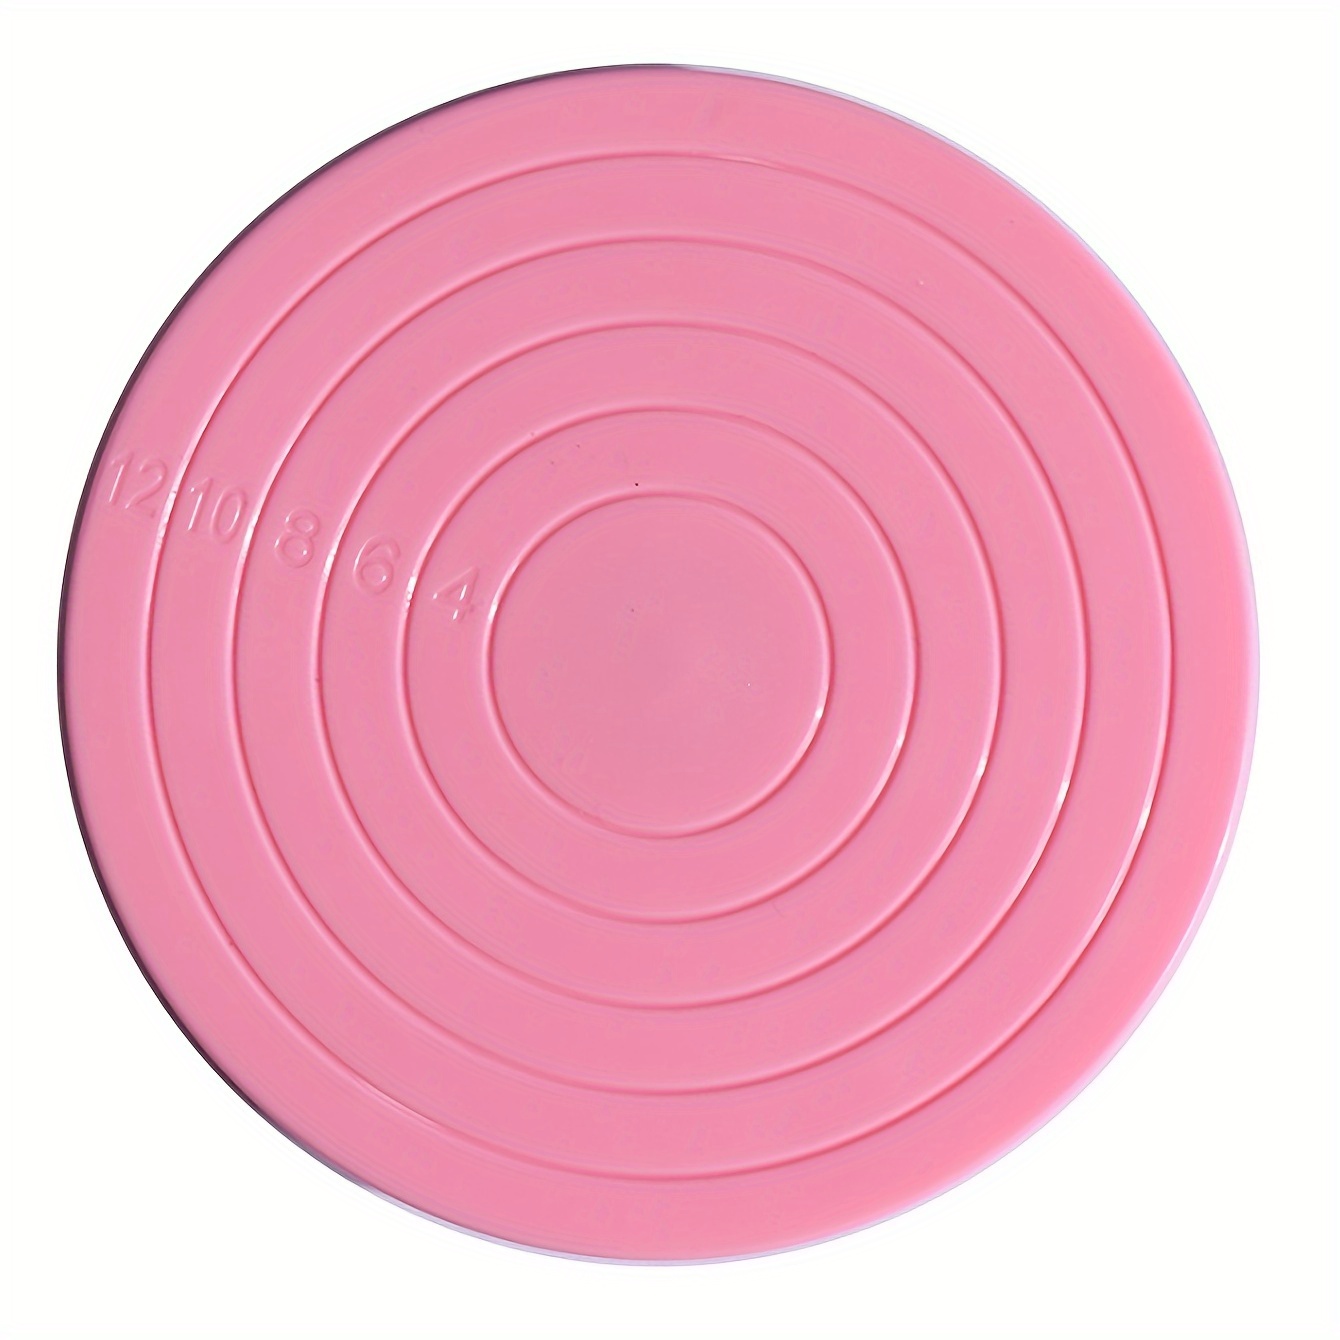 

1pc Pink Plastic Cookie Decorating Turntable, 5.5 Inch 360 Degree Revolving Cake Stand, Smooth Spinning For Diy Baking, Convenient Dessert Decoration Tool